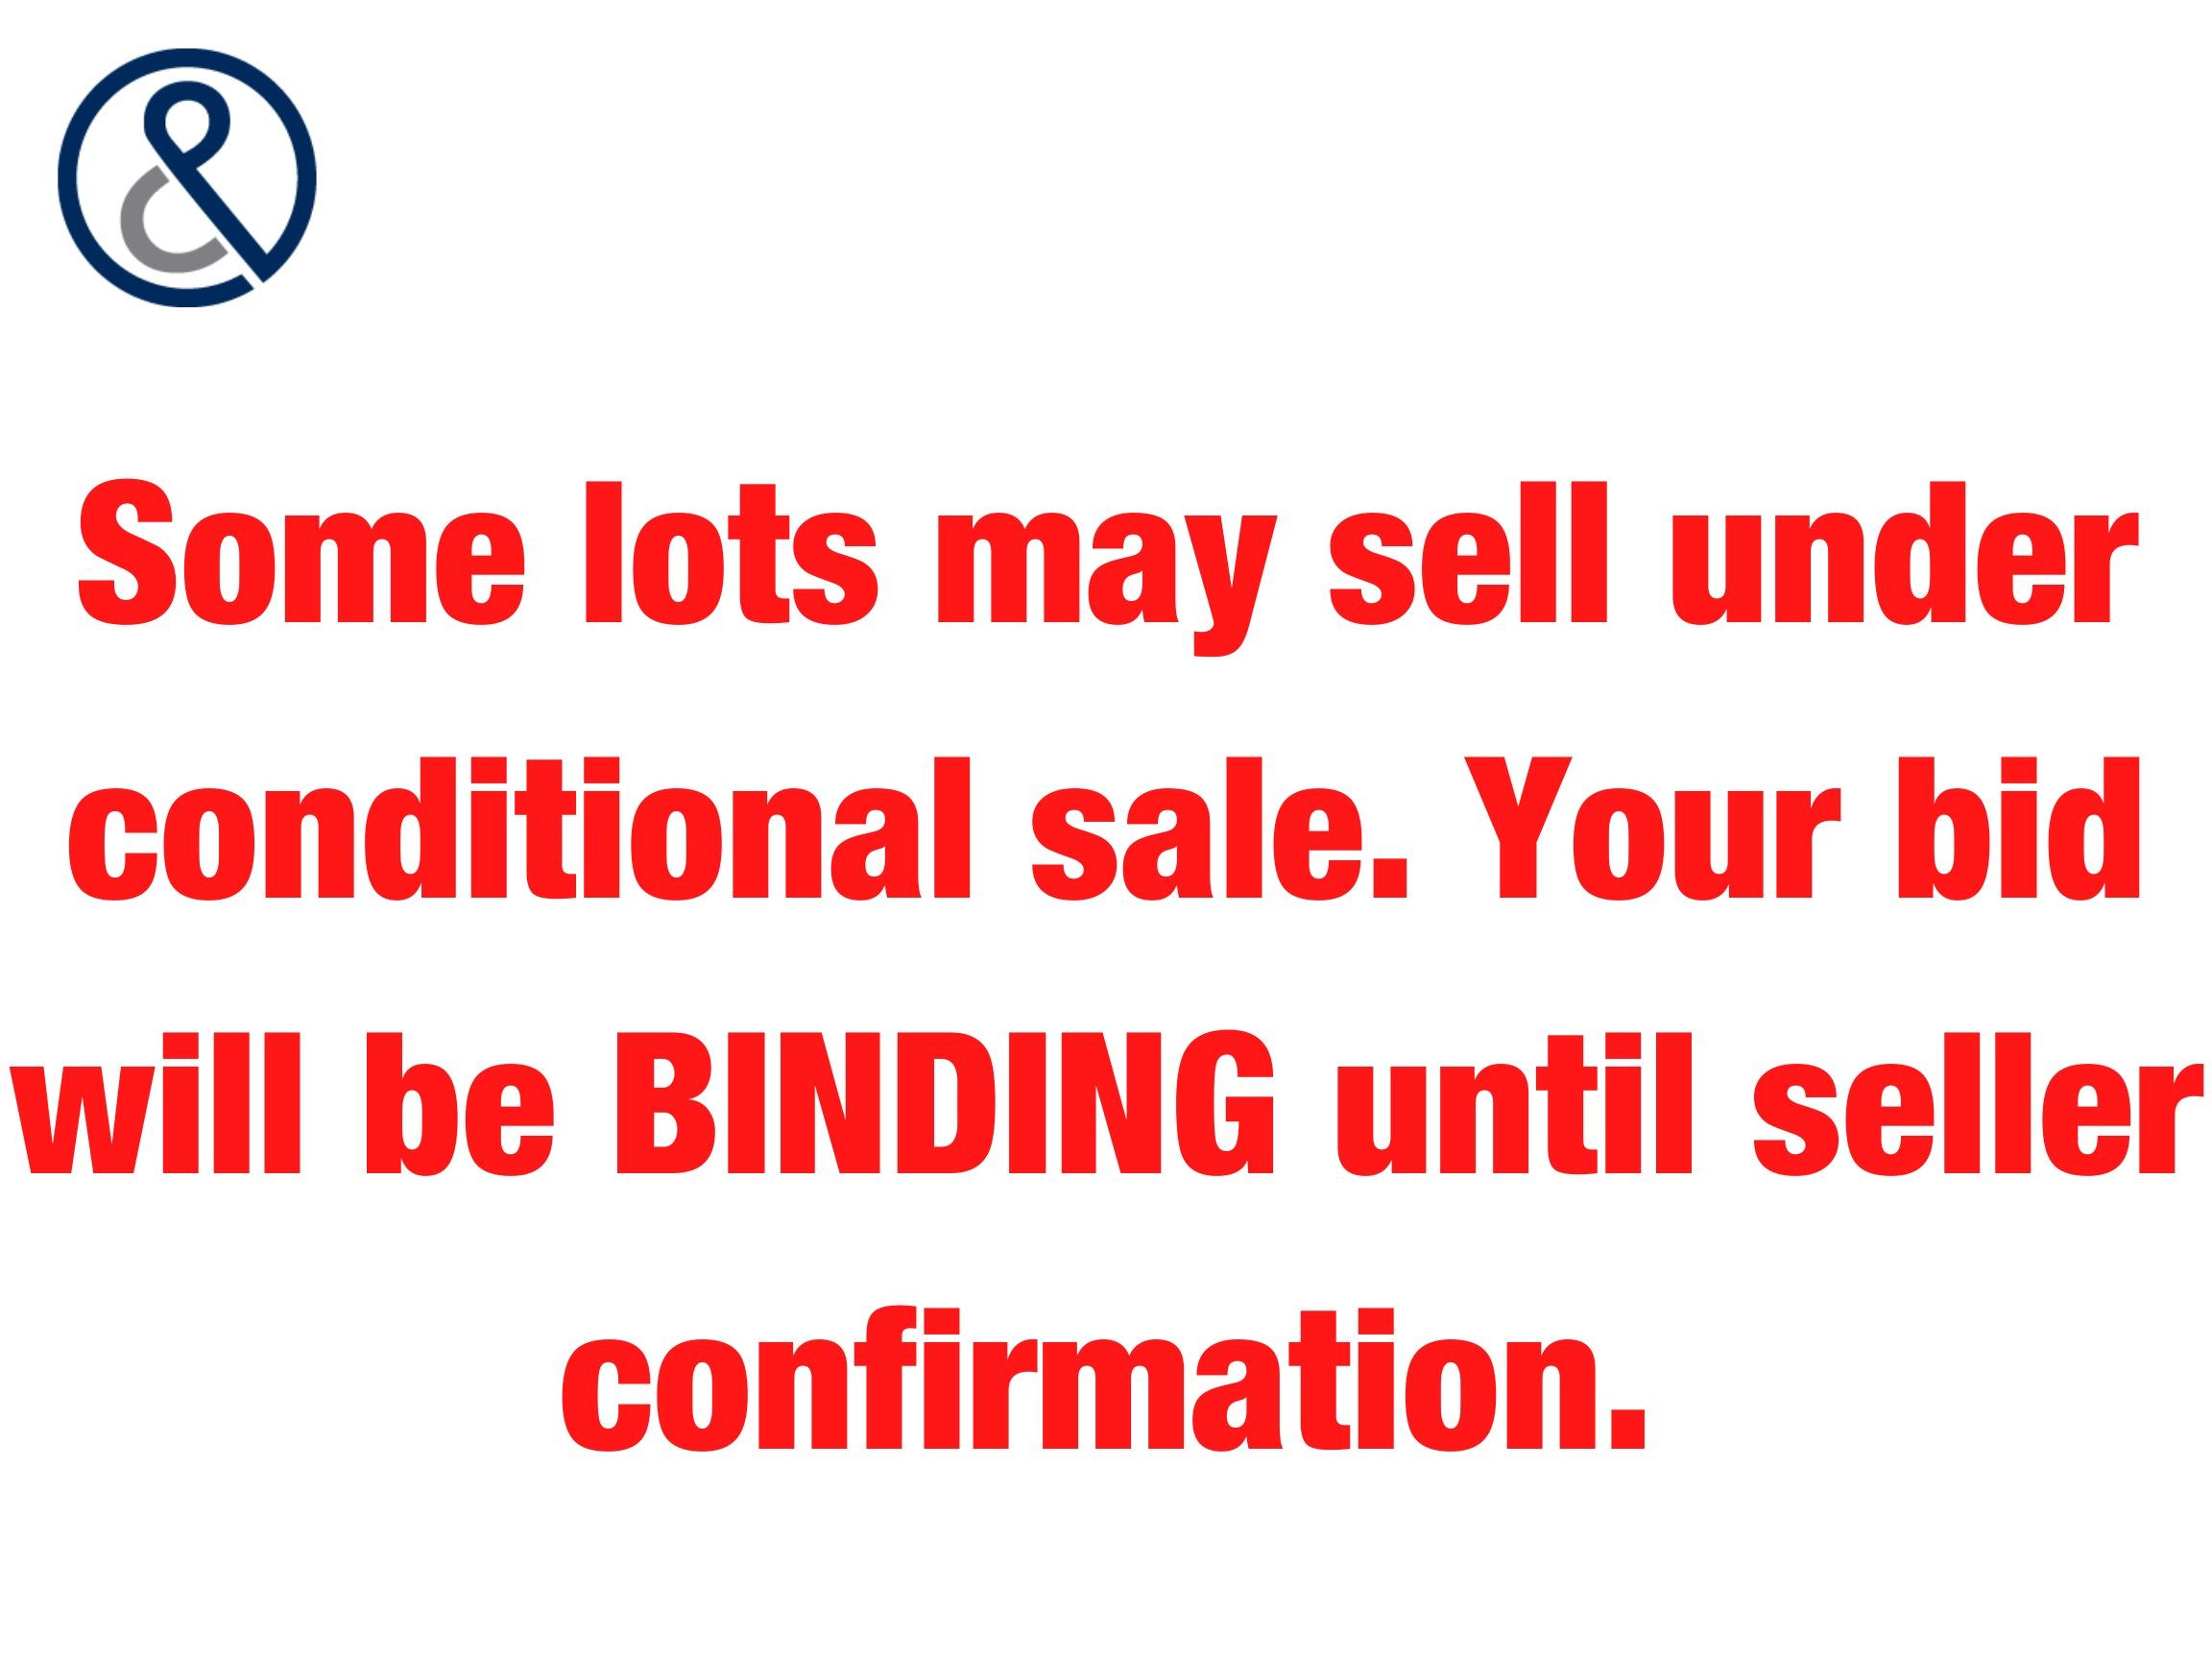 Conditional Sale